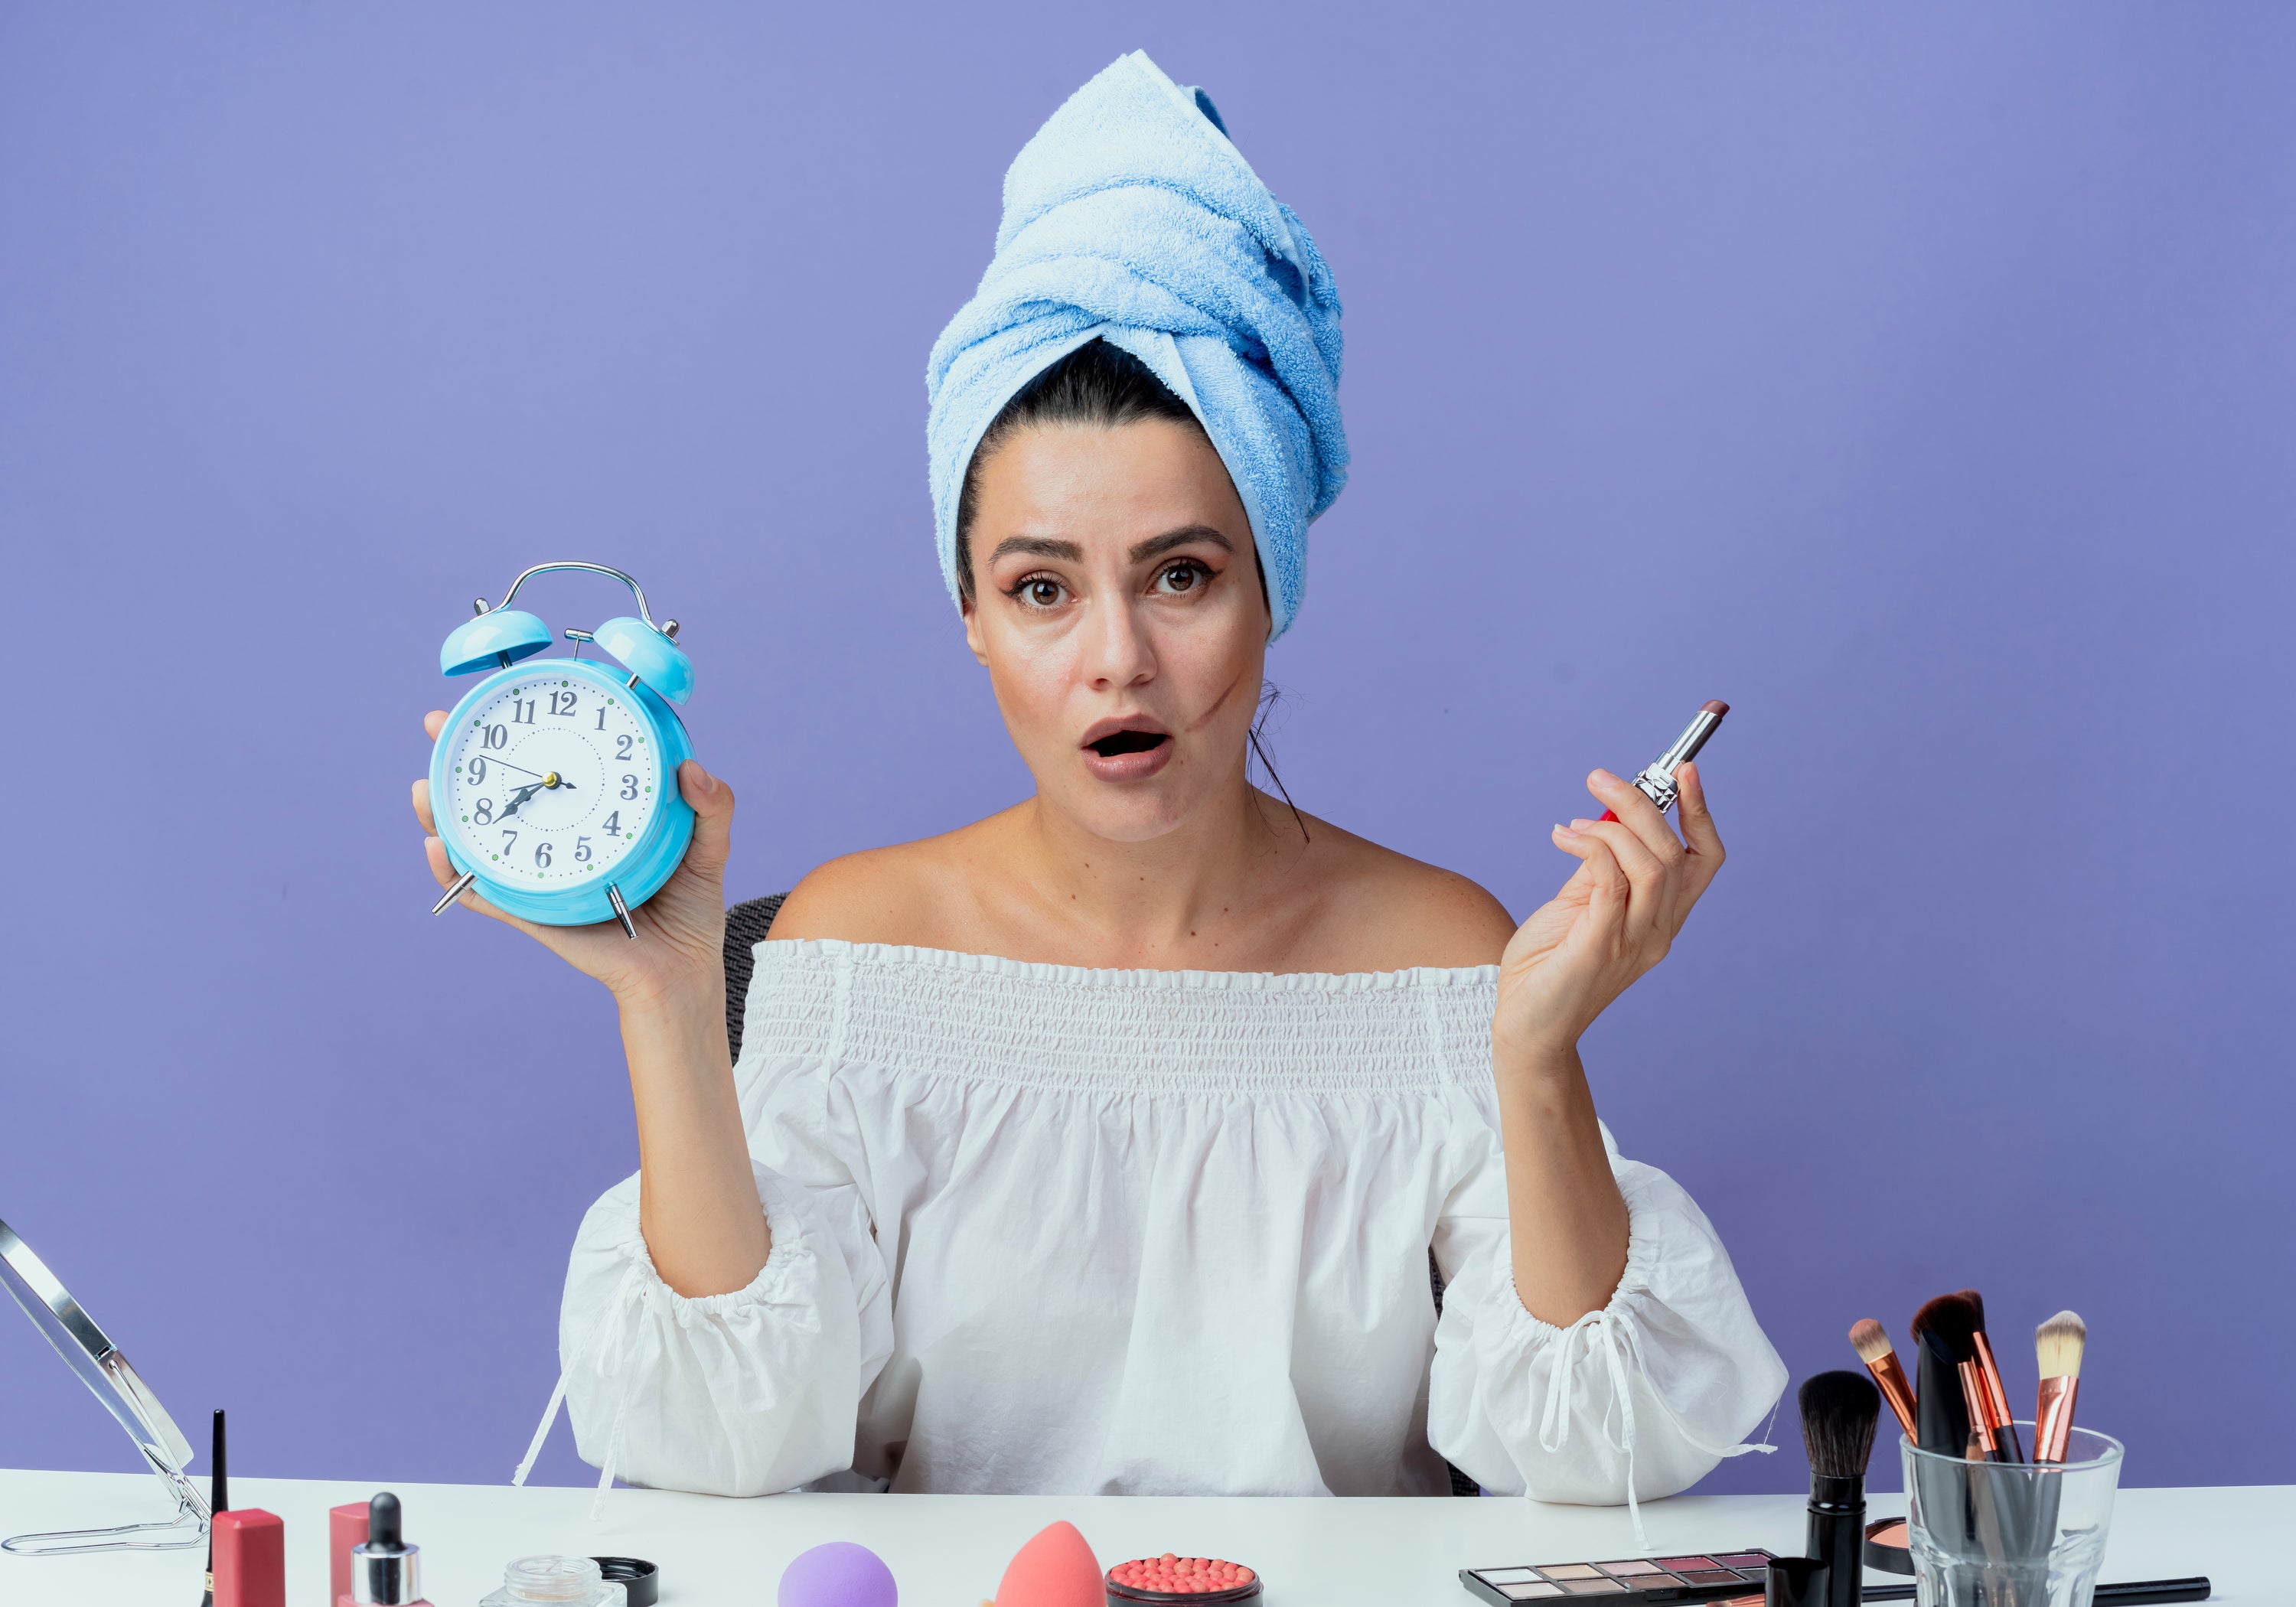 Beauty Hacks: Time-Saving Tips for Busy Mornings